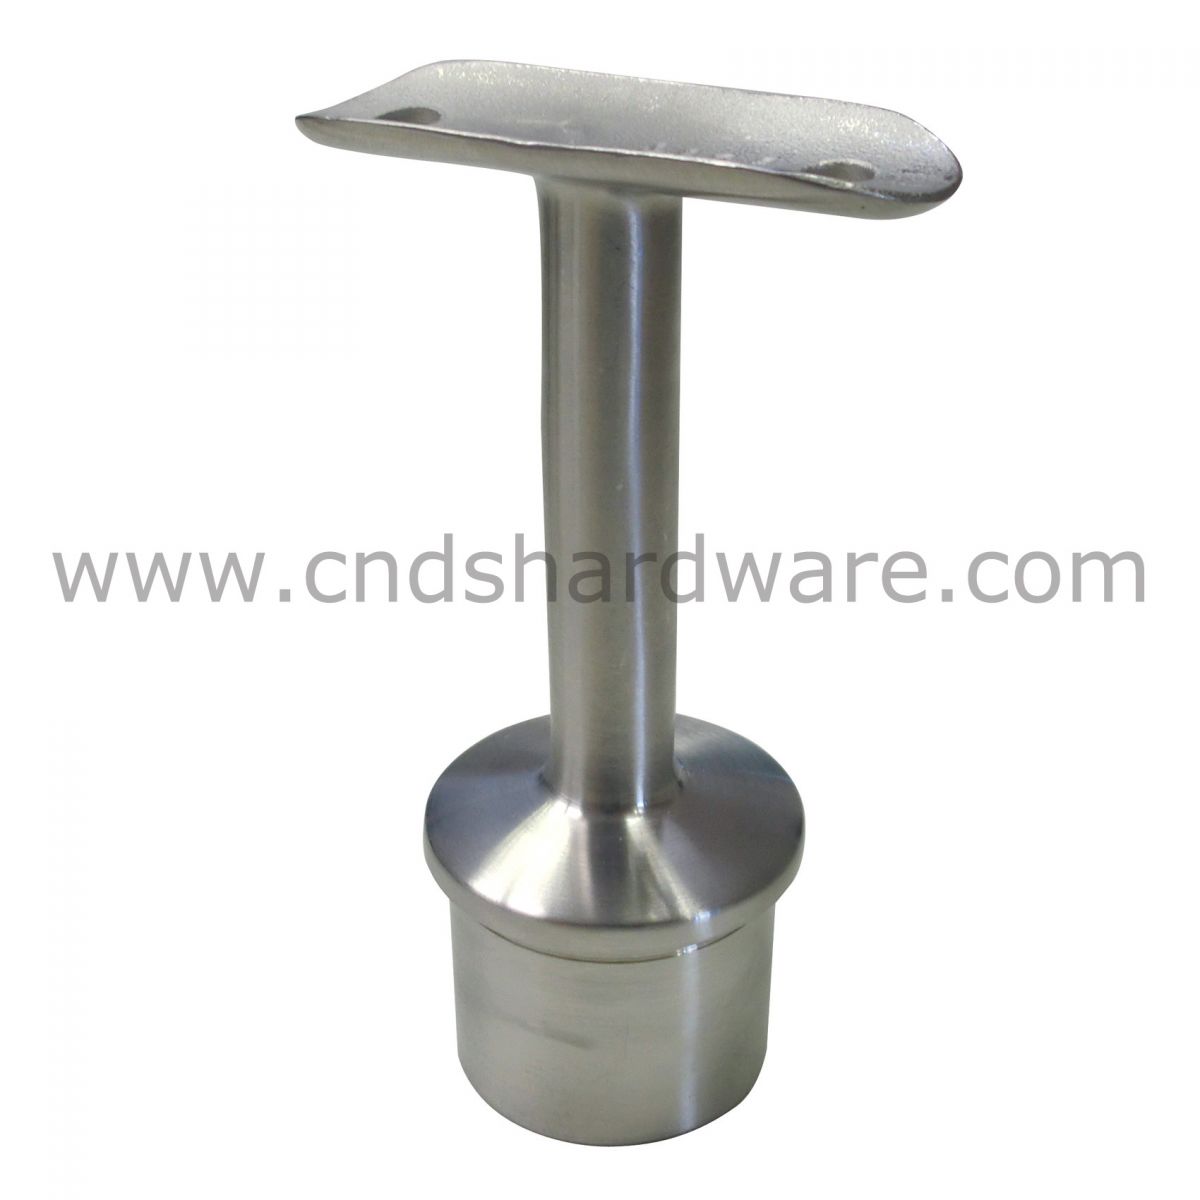 Handrail Support DS7011